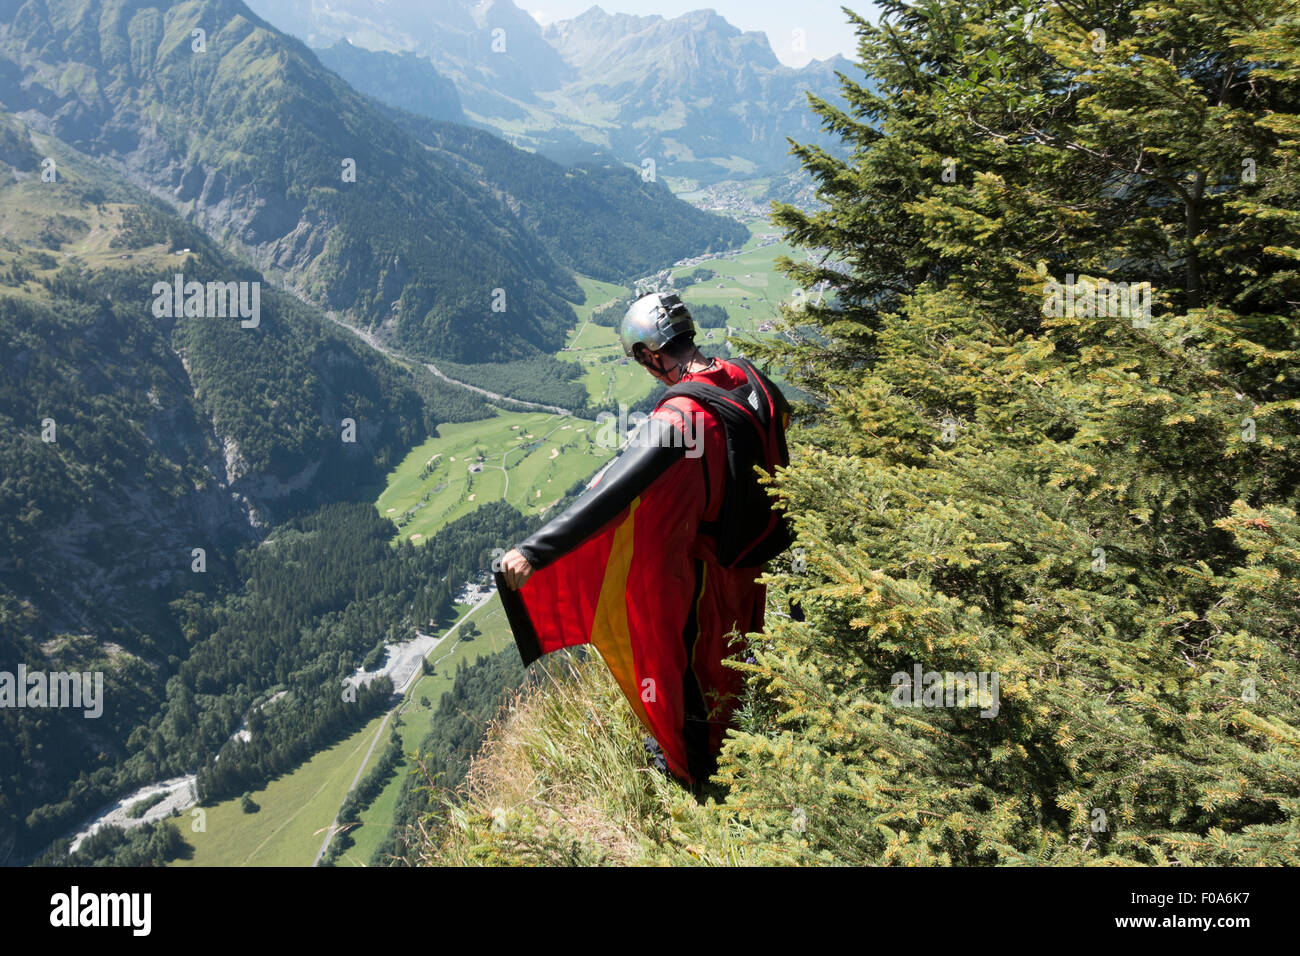 Wingsuit BASE jumper is getting ready to jump off a cliff and checking the altitude by facing downward & adjusting his wings. Stock Photo